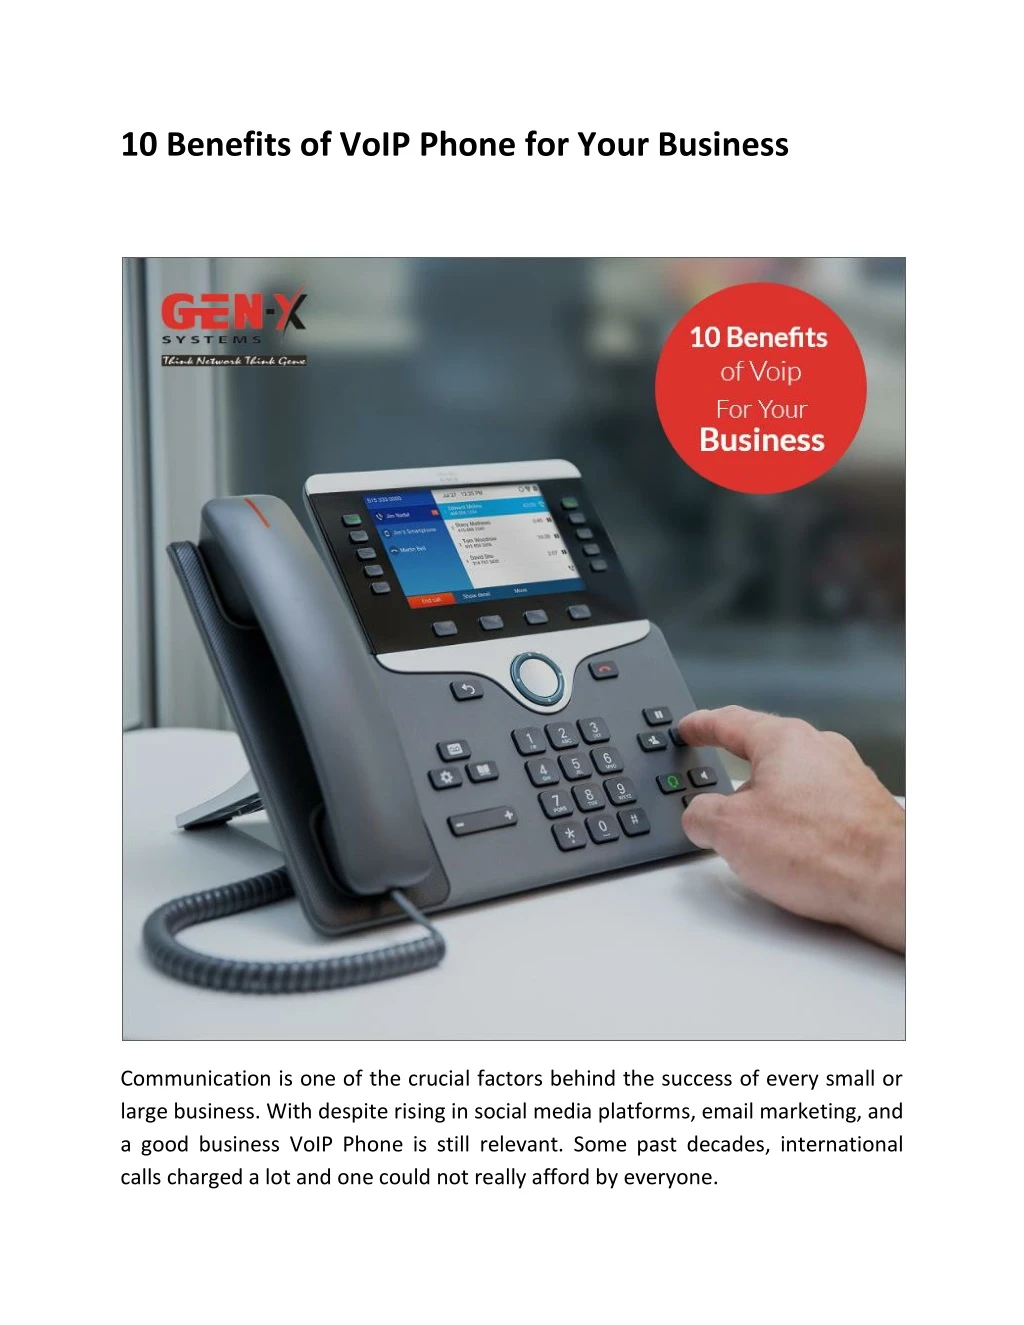 10 benefits of voip phone for your business